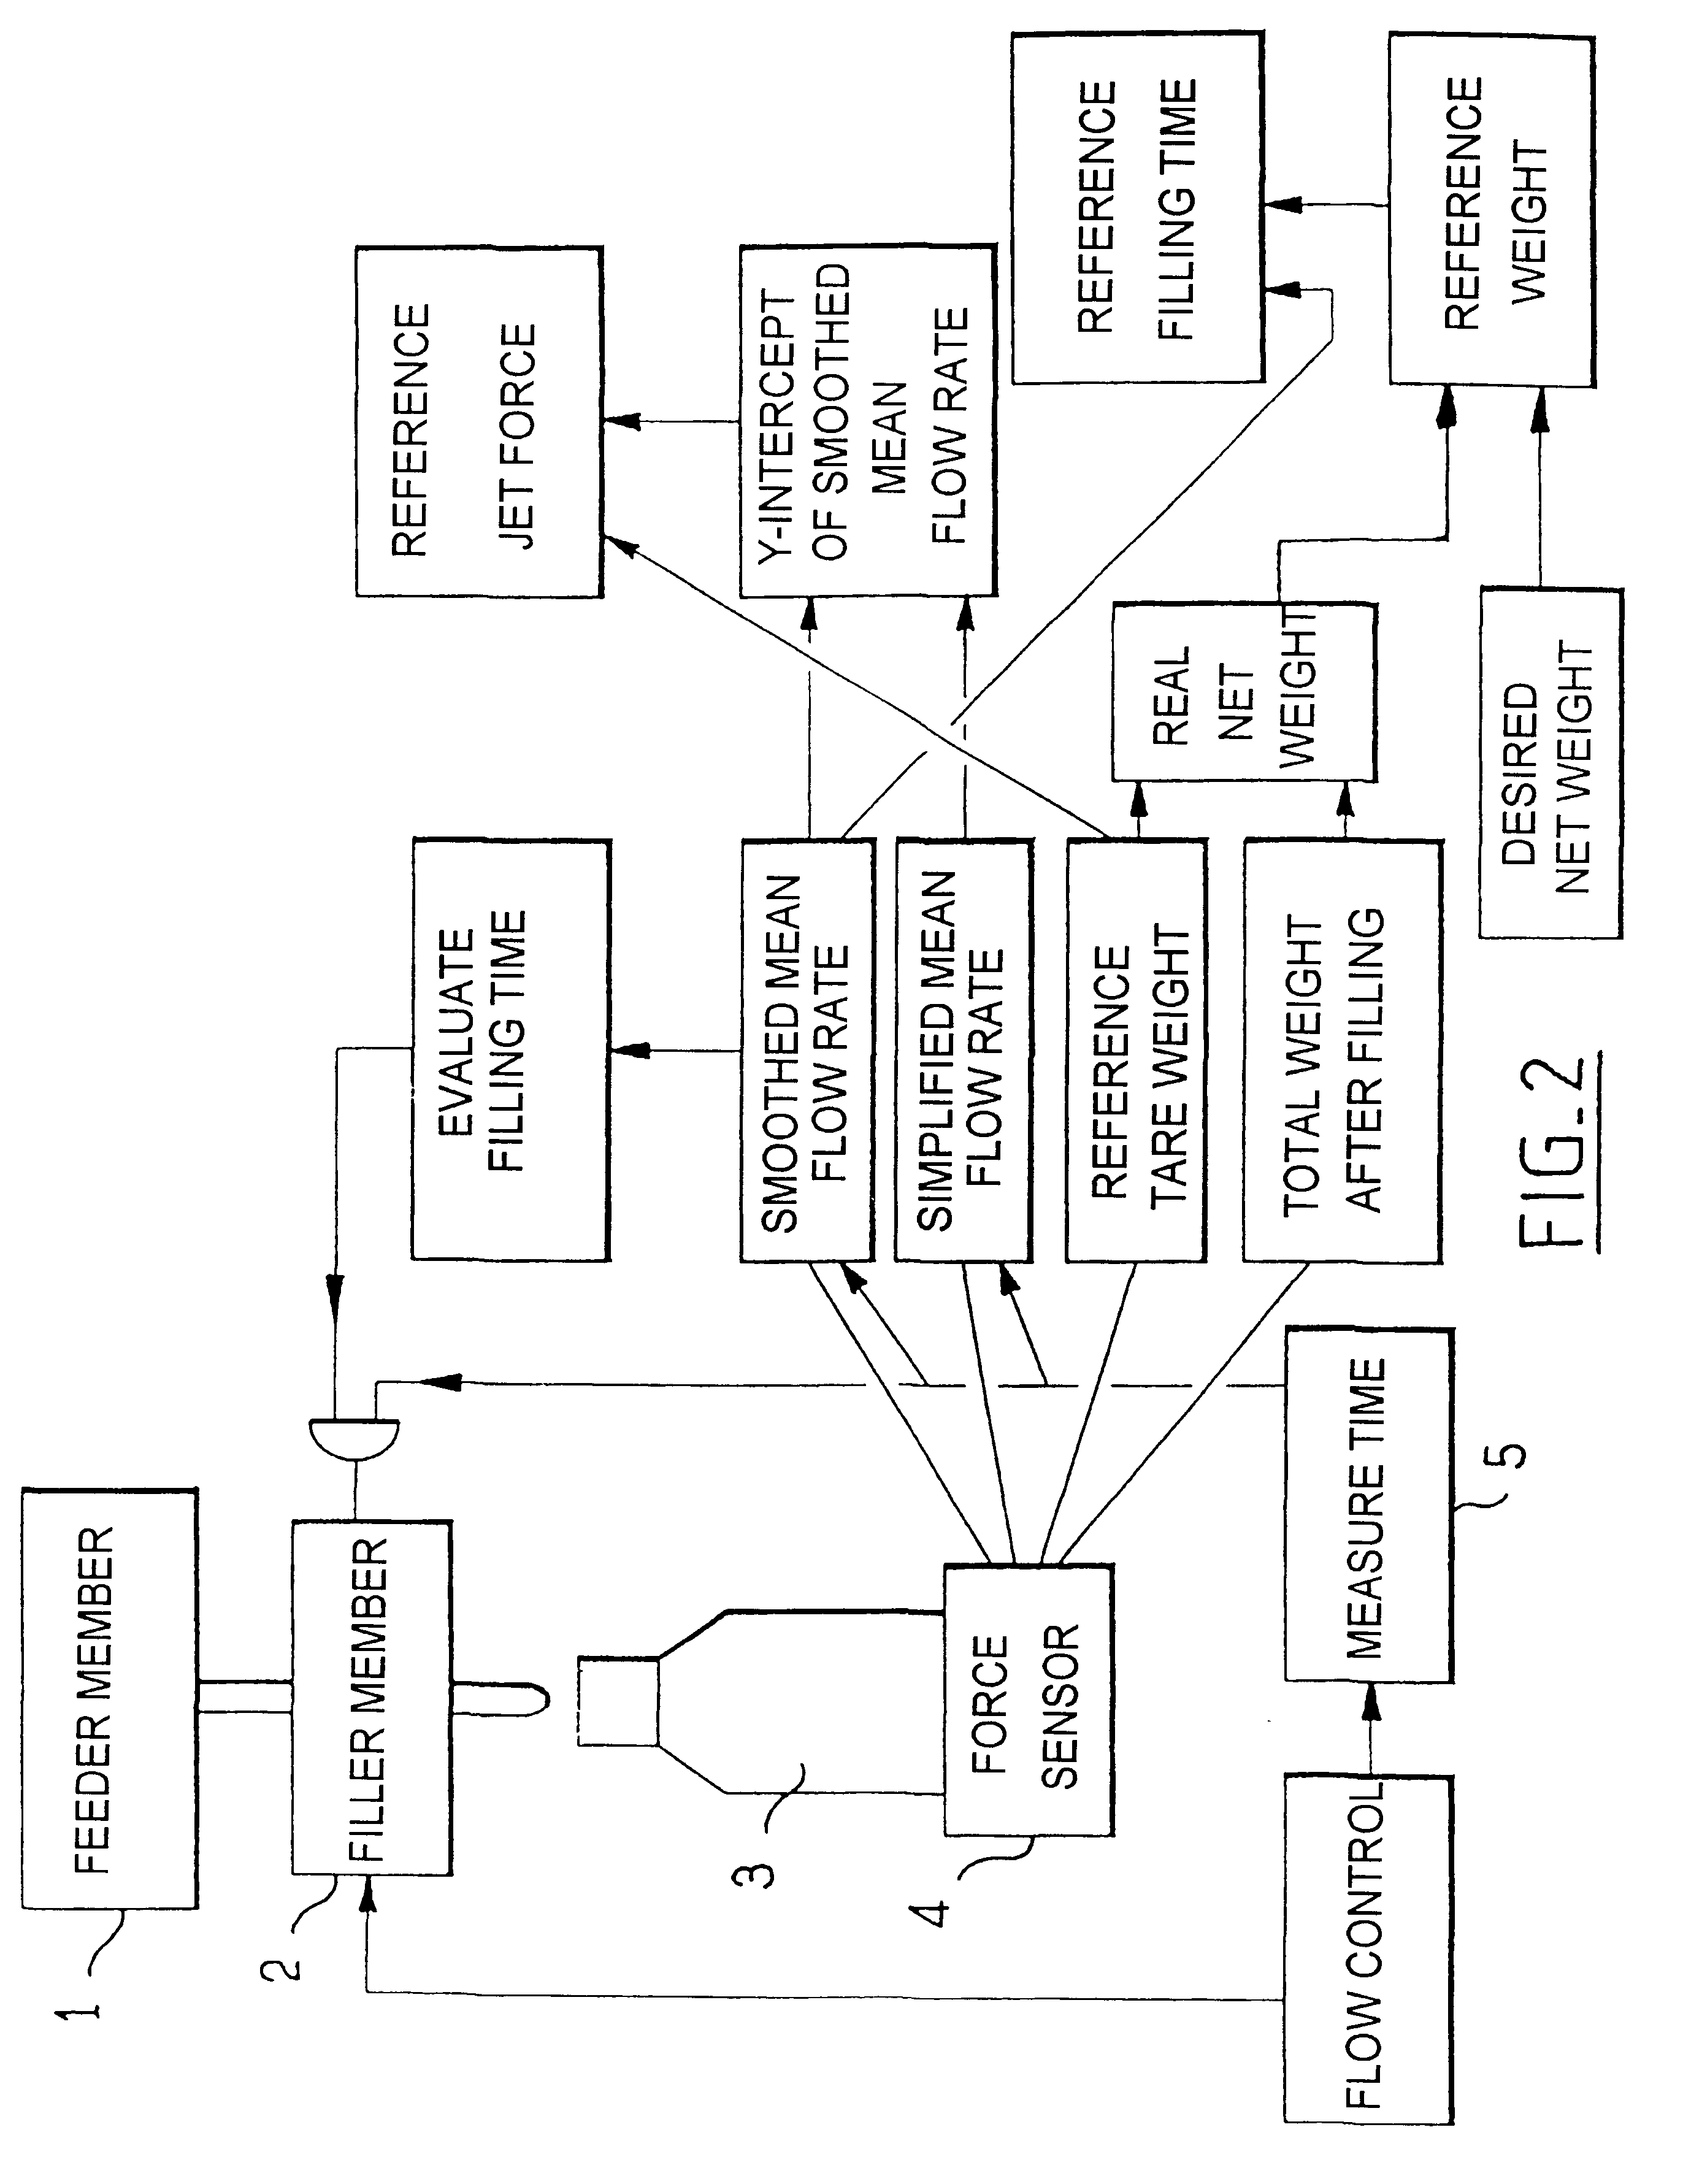 Method of filling a receptacle